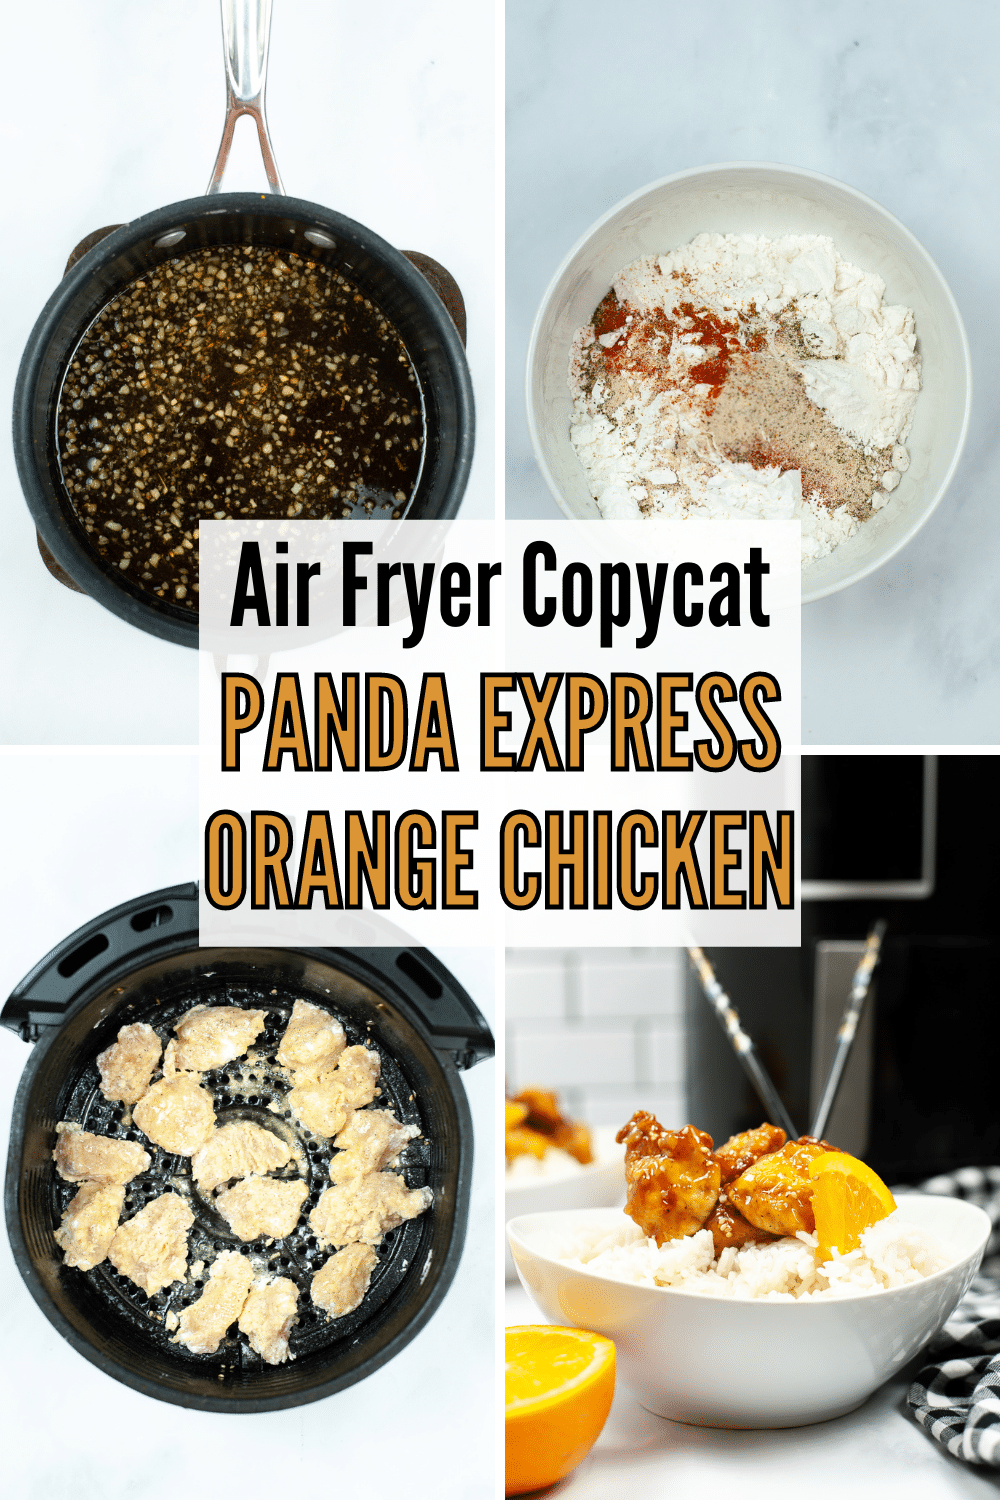 Skip the takeout and make this air fryer copycat Panda Express orange chicken at home instead. It's crispy chicken coated in a tangy sauce. #airfryer #pandaexrpress #orangechicken #copycatrecipe via @wondermomwannab